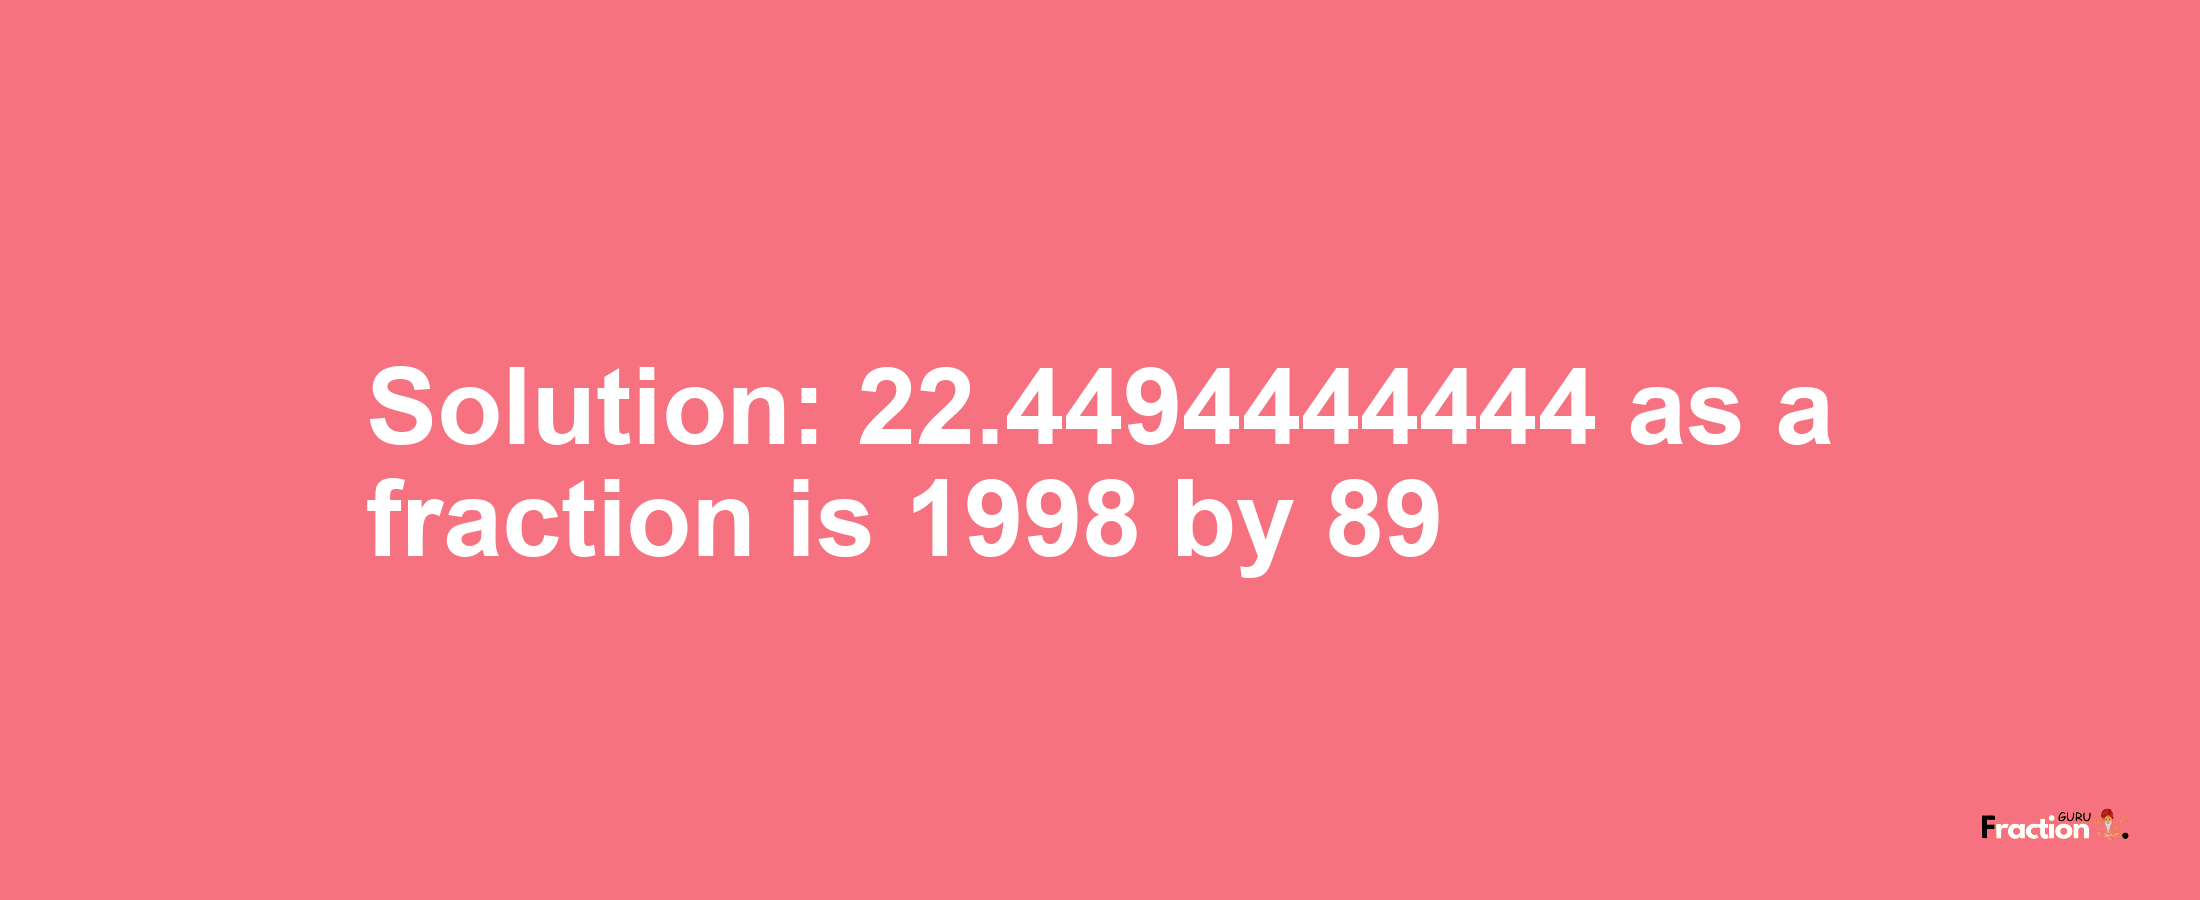 Solution:22.4494444444 as a fraction is 1998/89